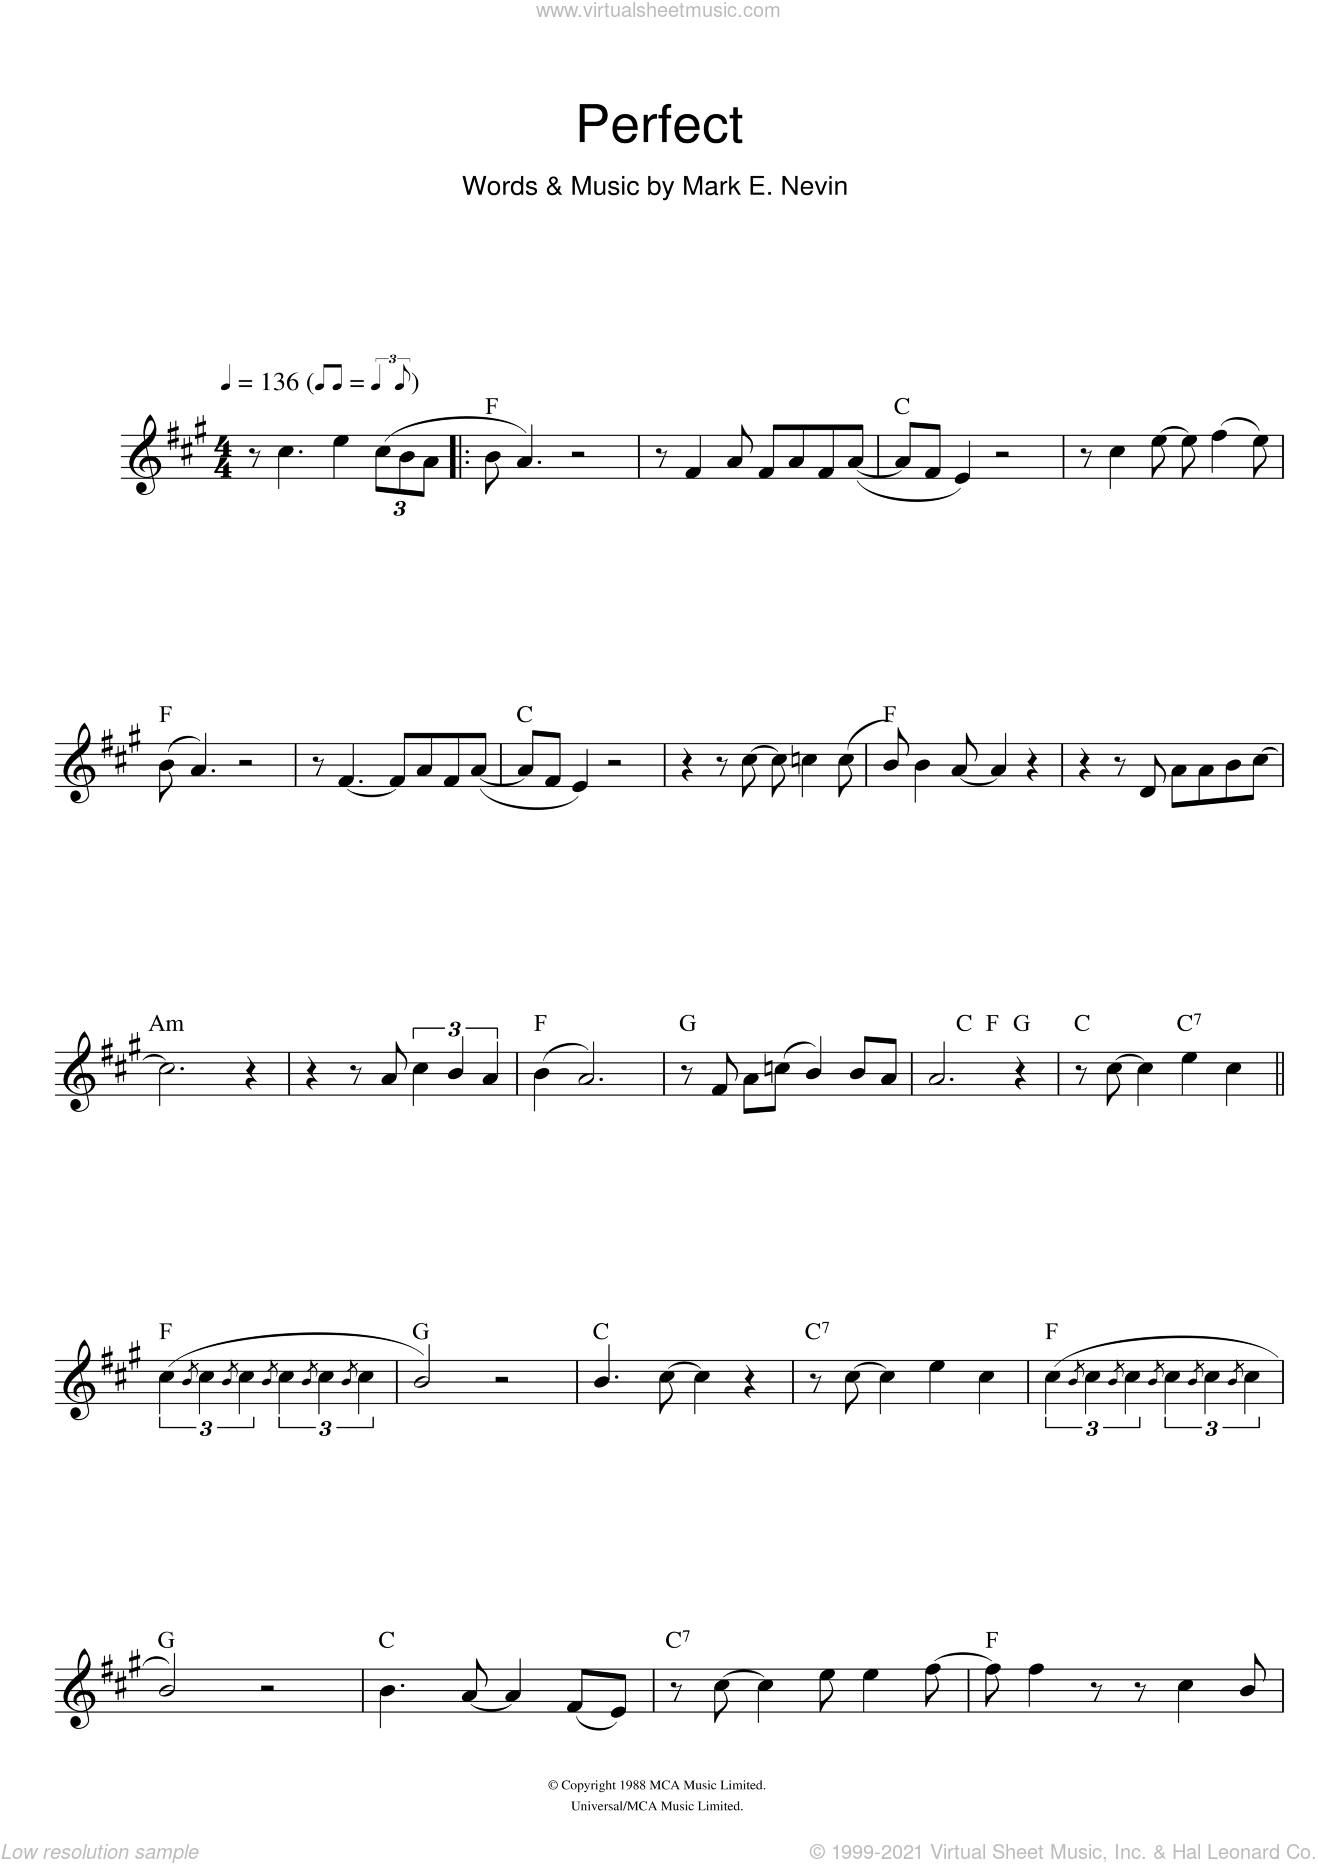 Fairground Attraction: Perfect sheet music for alto saxophone solo